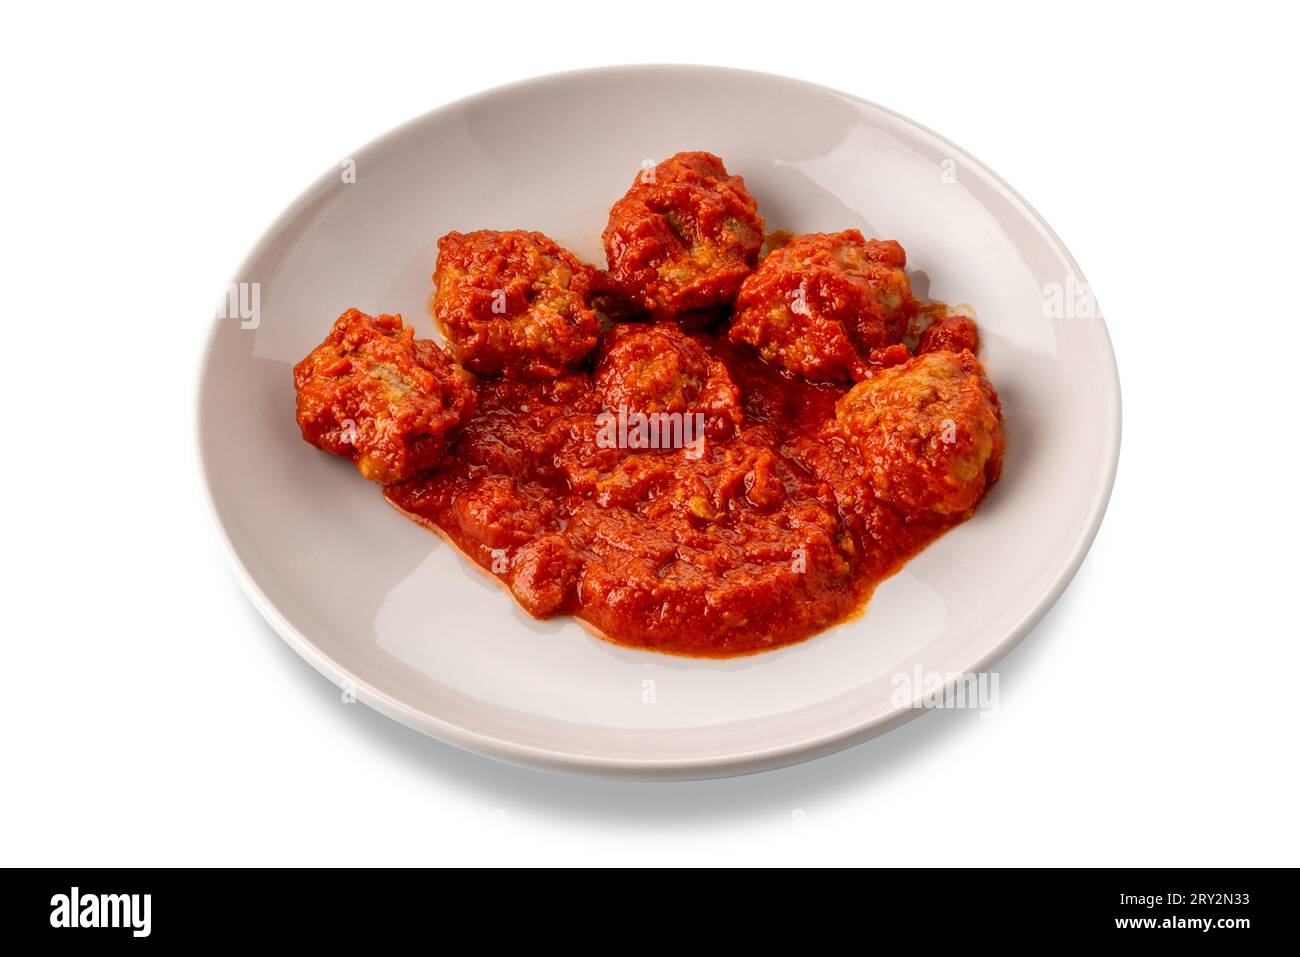 Meatballs with tomato sauce, typical Italian recipe, in white plate isolated on white with clipping path included Stock Photo